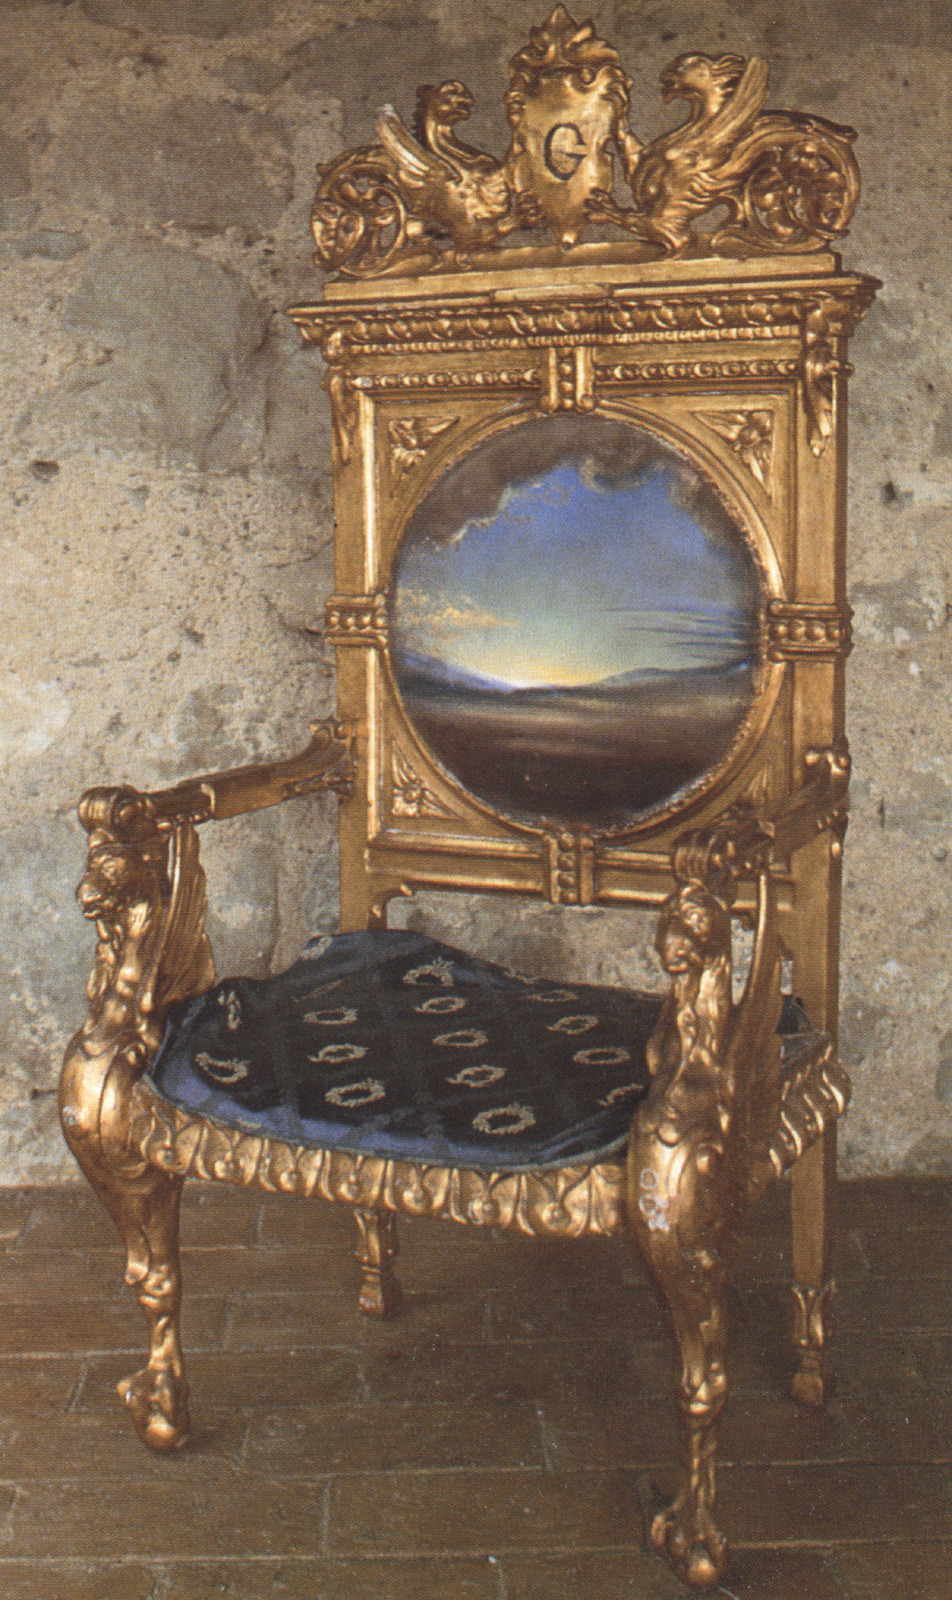 artist-dali:
“Armchair with Landscape Painted for Gala’s Chateau at Pubol by Salvador Dali
”